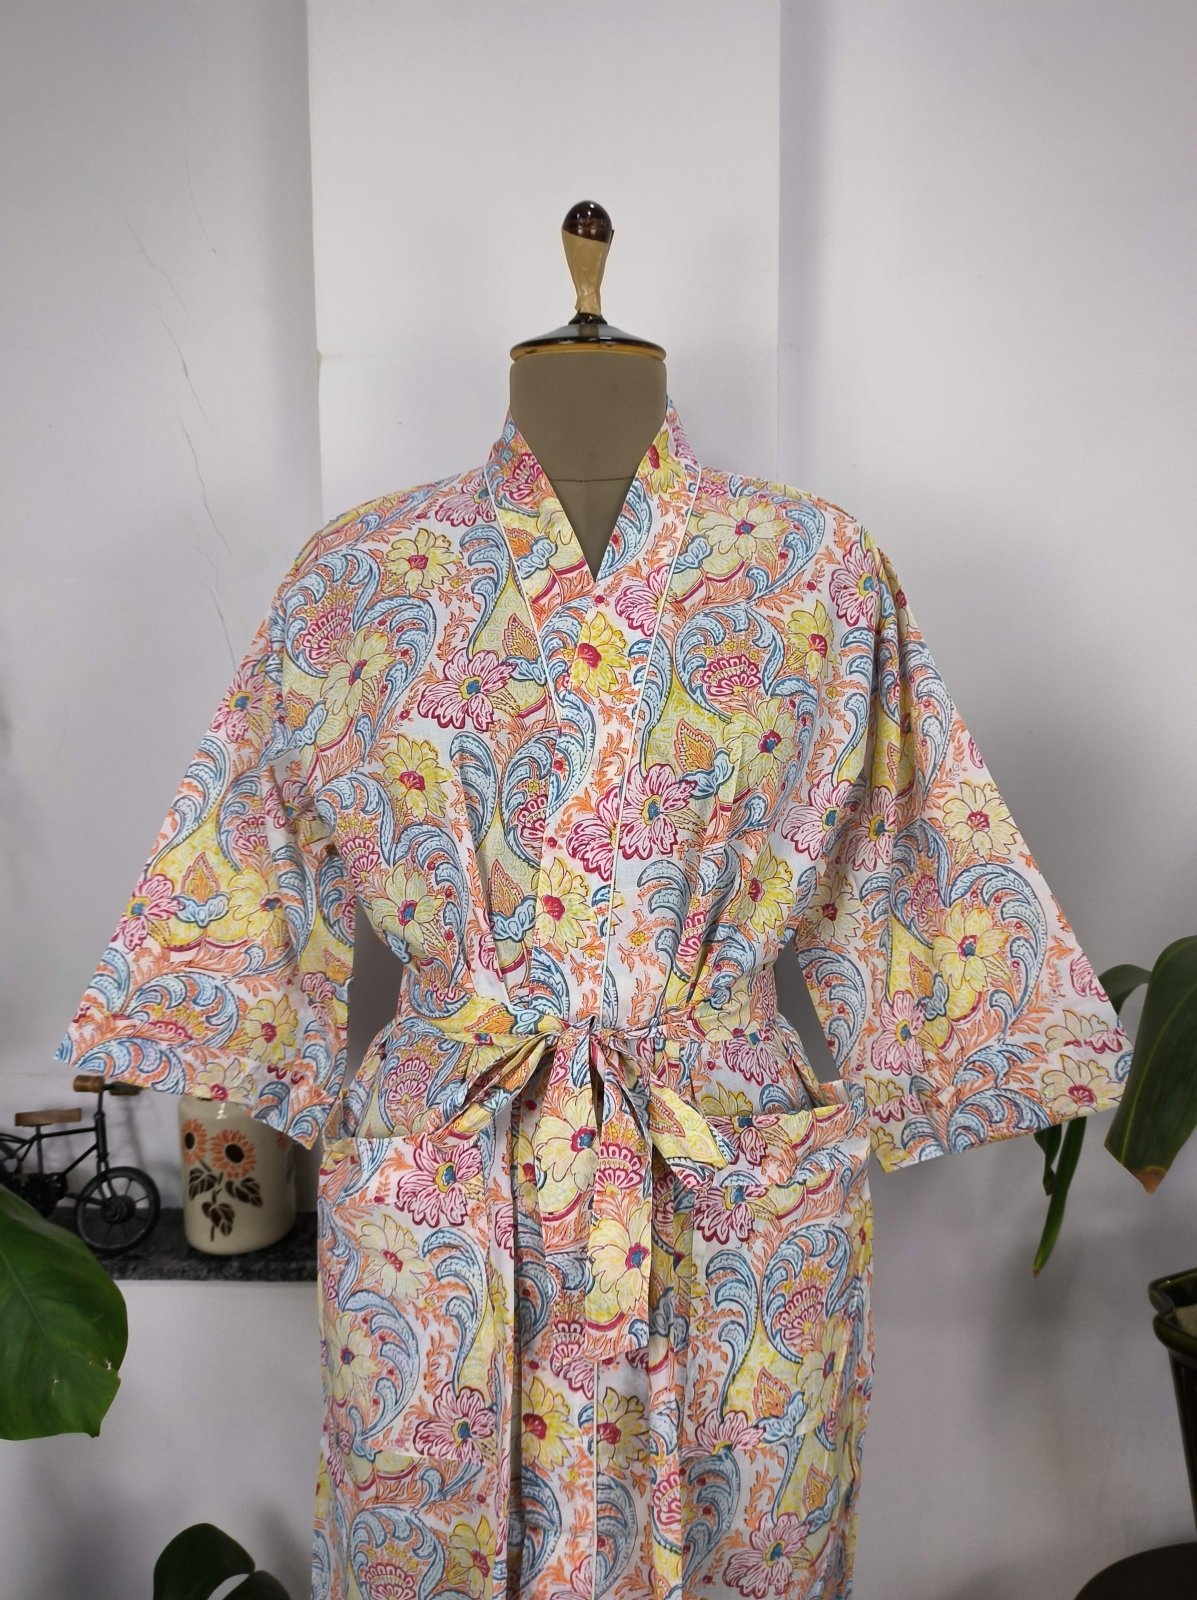 Boho House Robe Indian Handprinted Cotton Kimono Lively Blossoms | Perfect for Summer Luxury Beach Holidays Yacht Cover Up Stunning Dress - The Eastern Loom